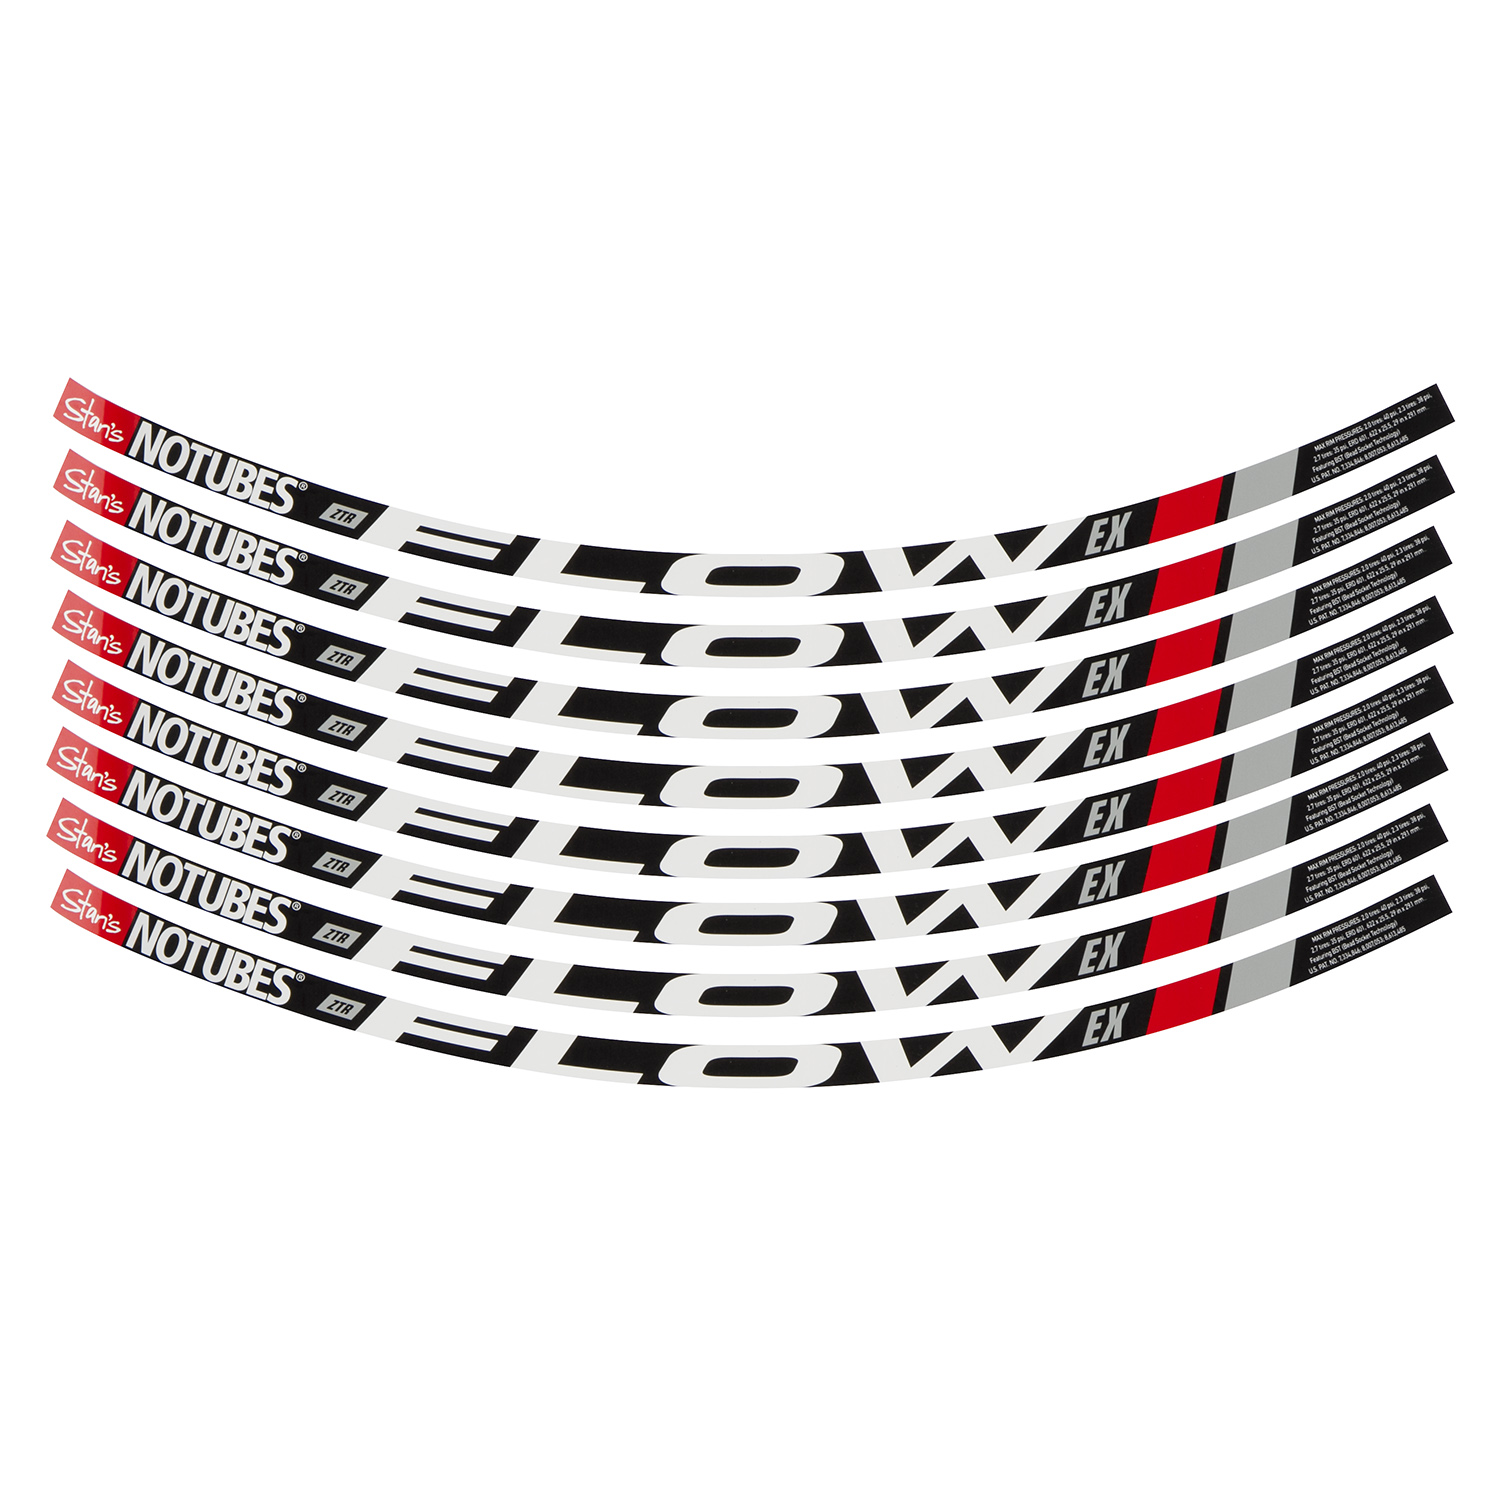 Stan's NoTubes Rim Sticker Kit ZTR Flow Red, for one Wheel Set, for ZTR Flow 2015, 29 Inch